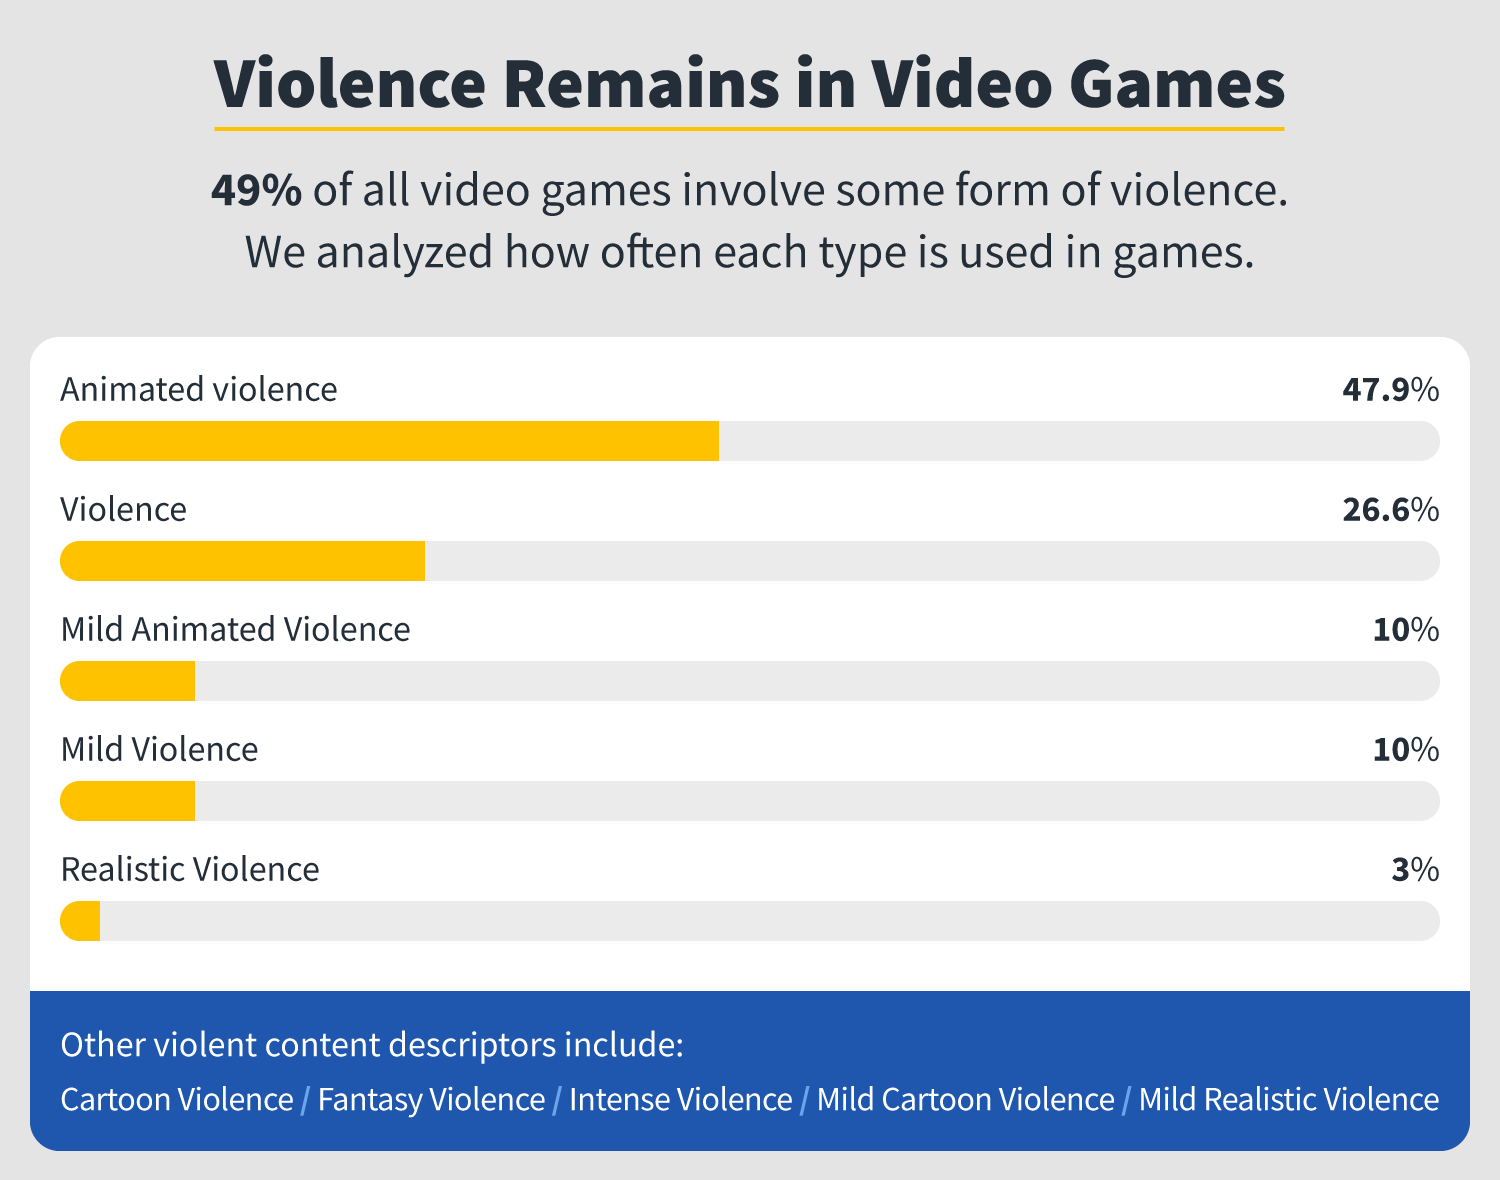 in post 02 violence remains in video games